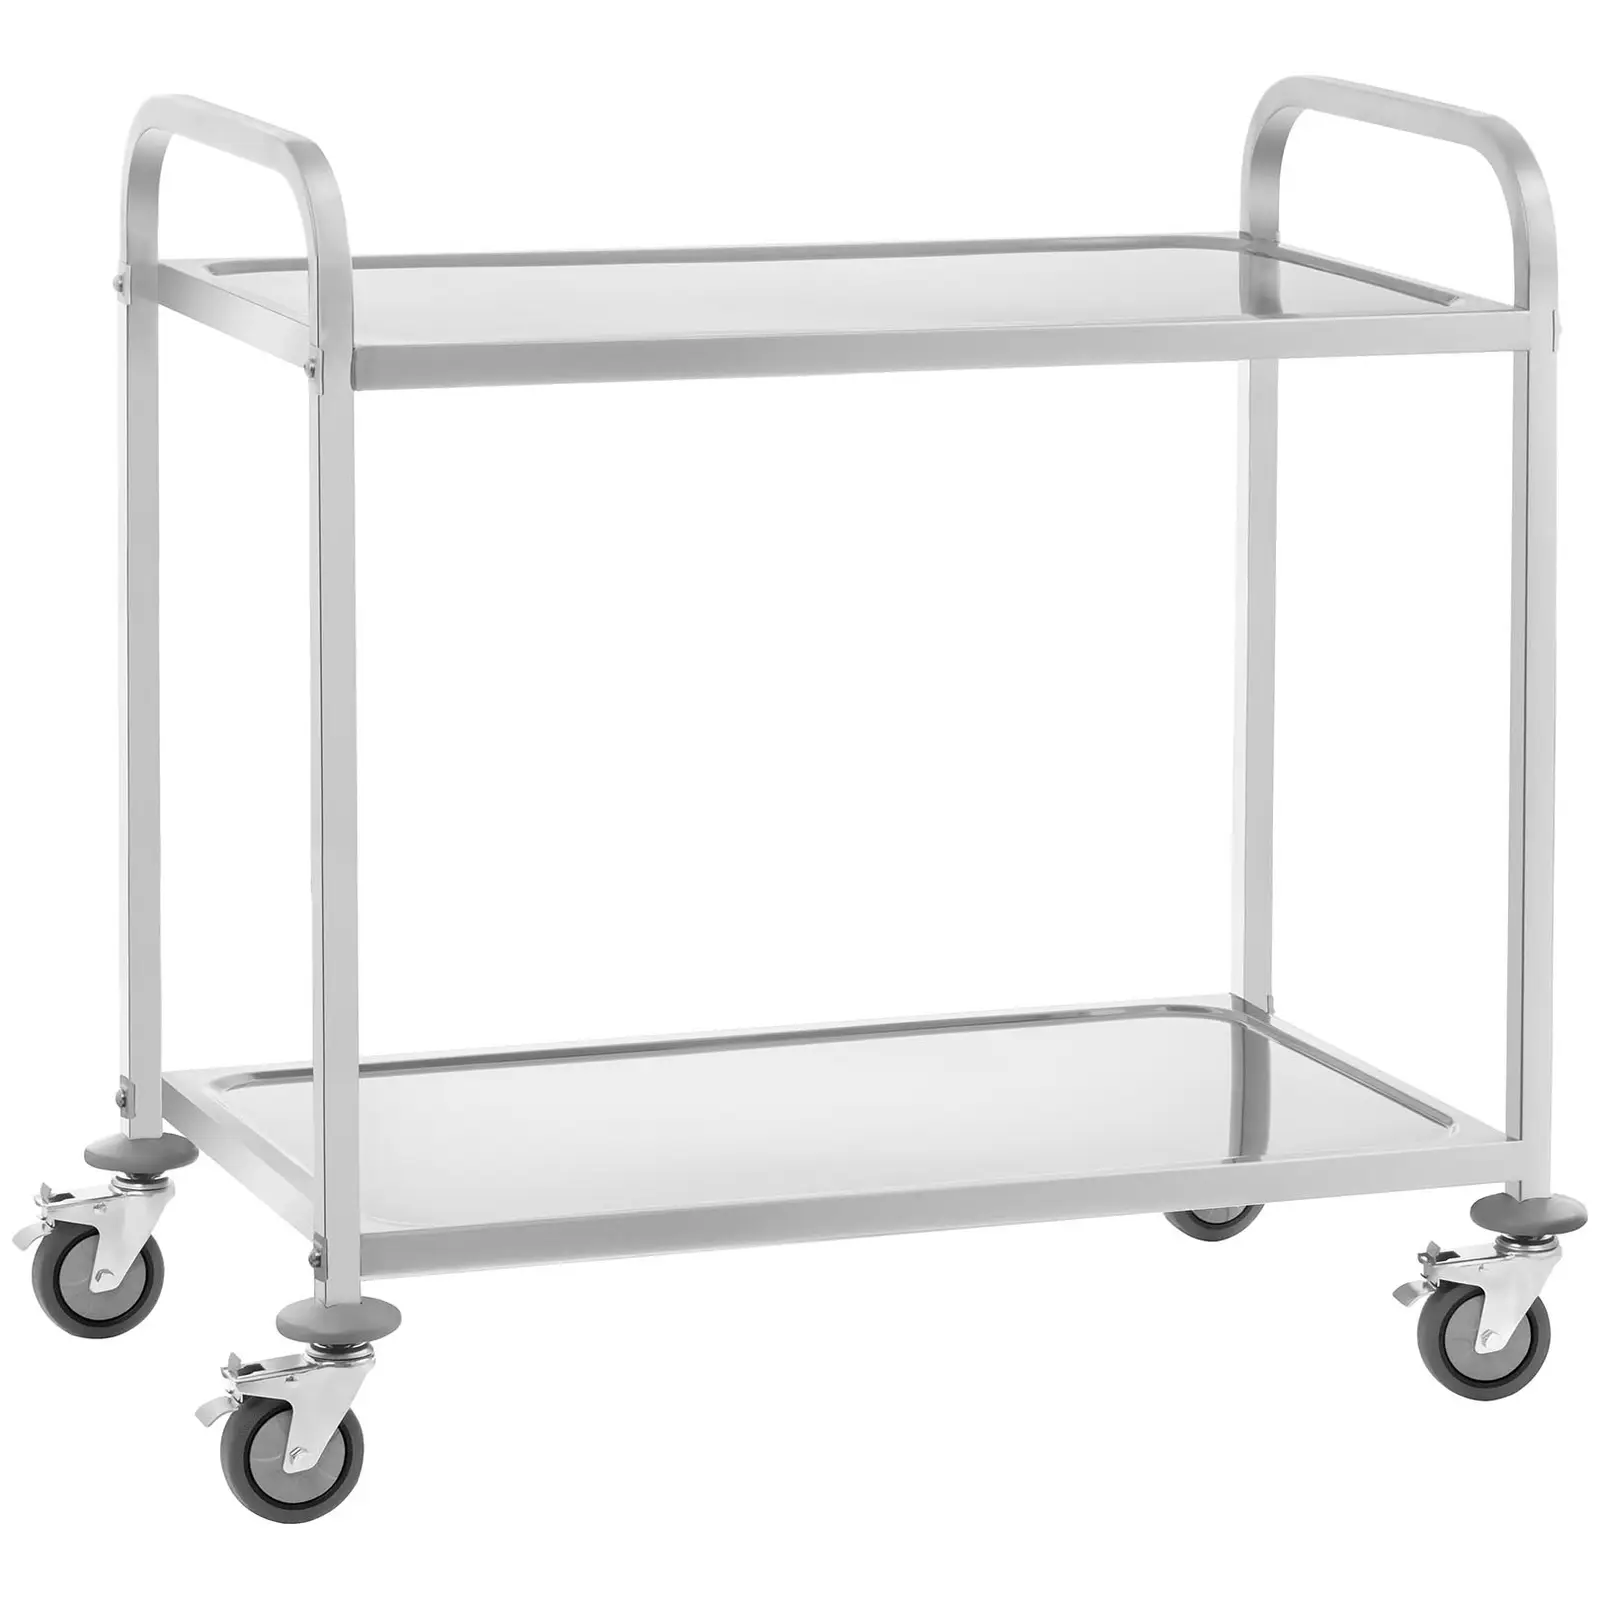 Stainless Steel Serving Trolley - 2 Shelves - Up To 100 kg